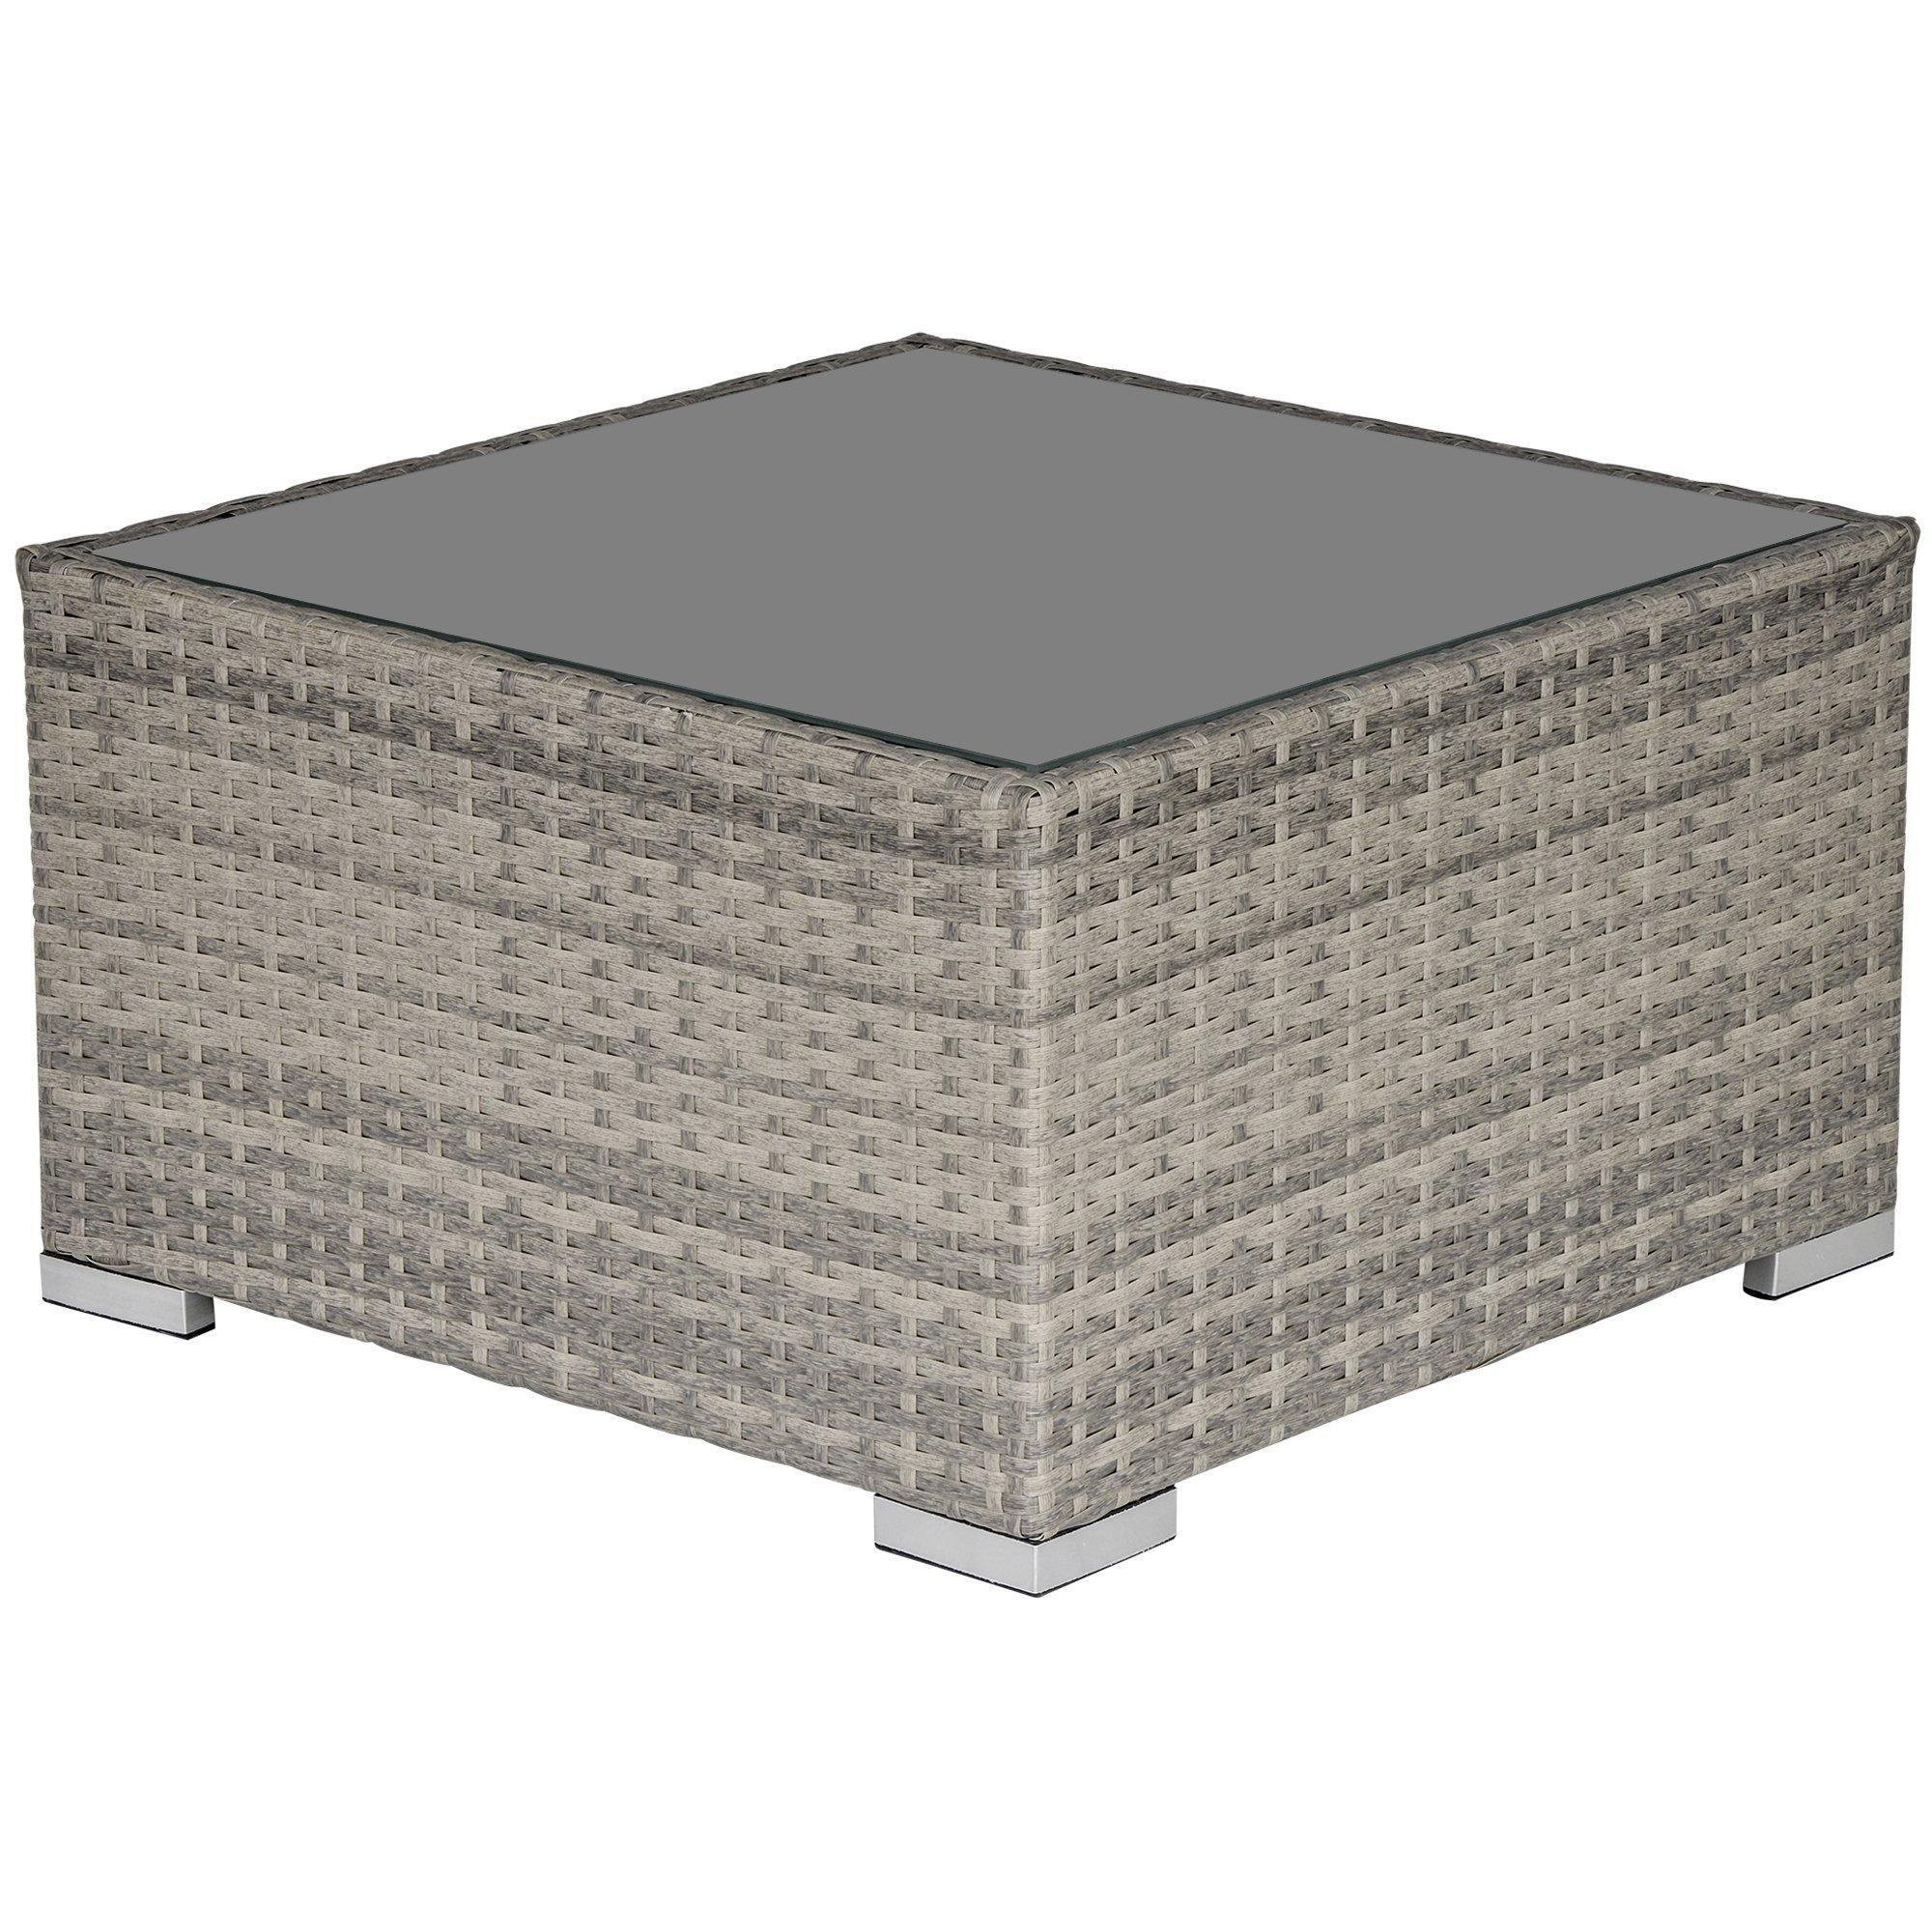 Patio Wicker Coffee Table with Glass Top Suitable for Garden Backyard - image 1